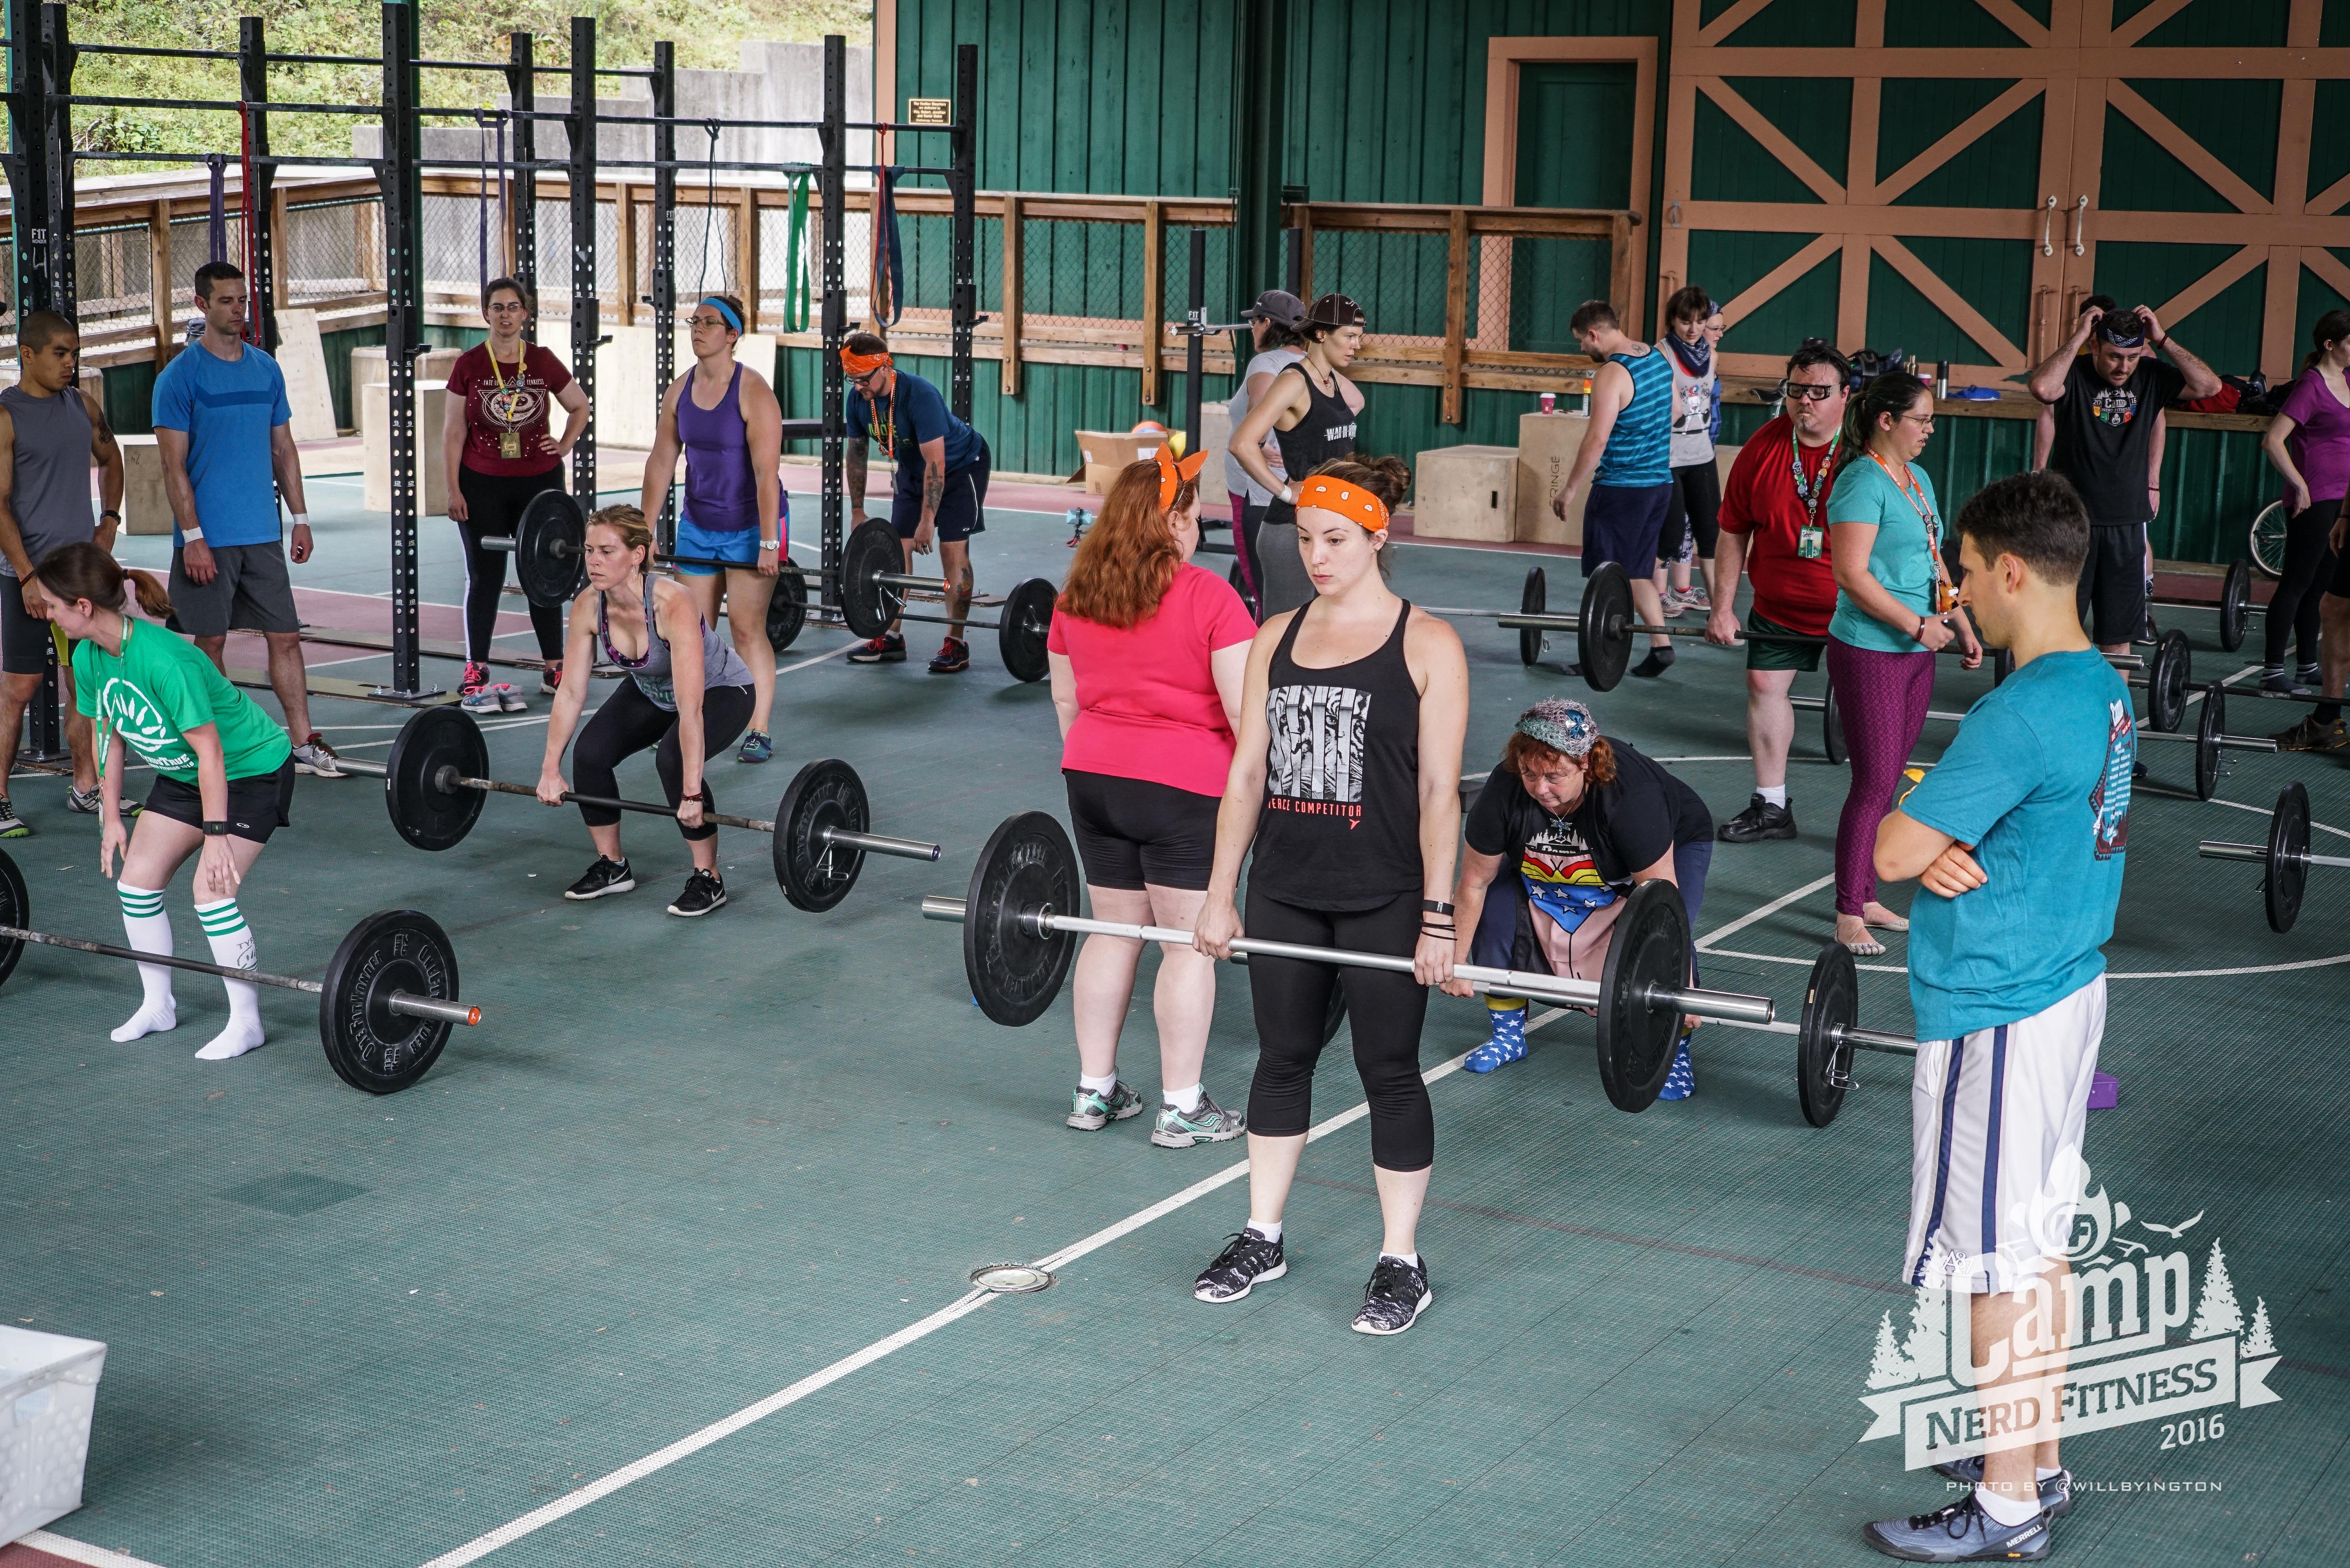 It was awesome to see so many women lifting weights at camp!